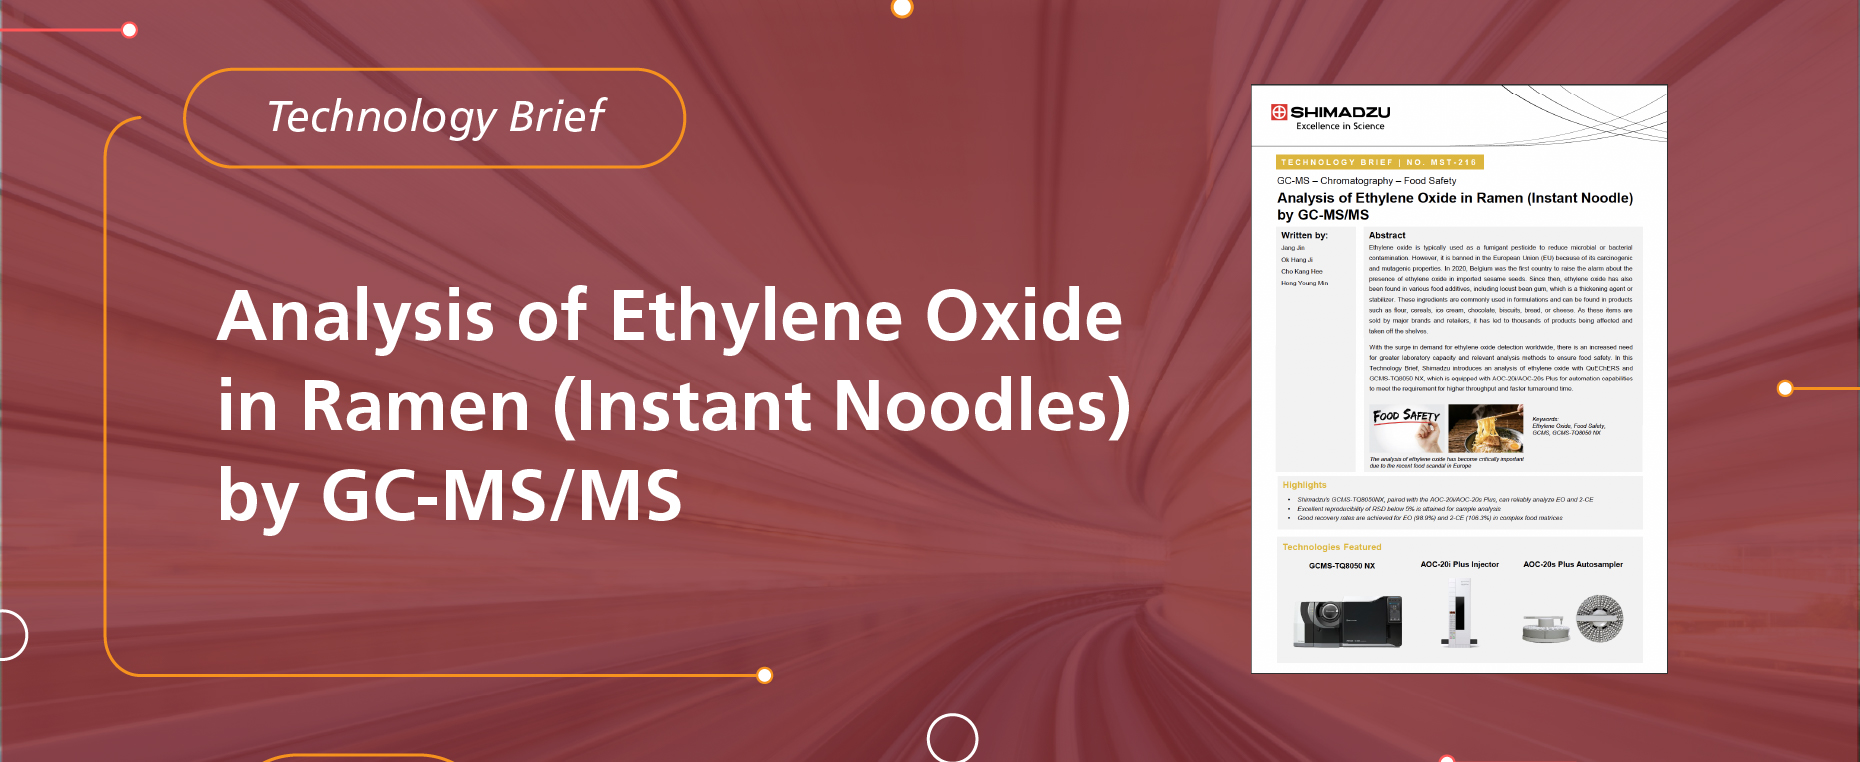 Analysis of Ethylene Oxide in Ramen (Instant Noodles) by GC-MS/MS